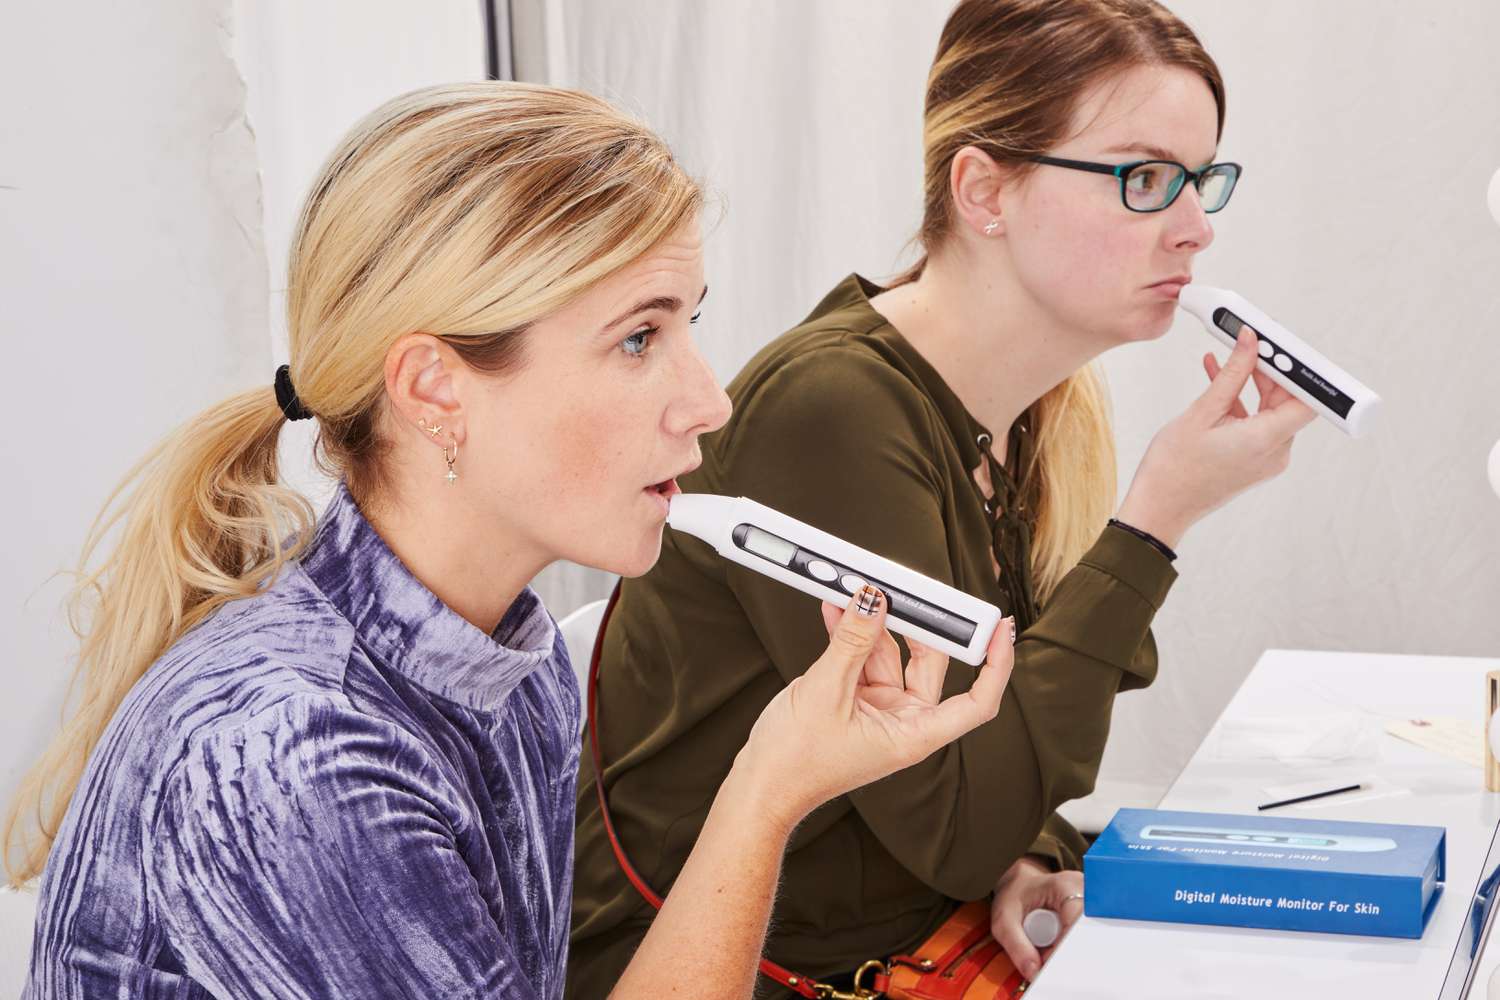 Two people using digital moisture monitors for skin on their lips